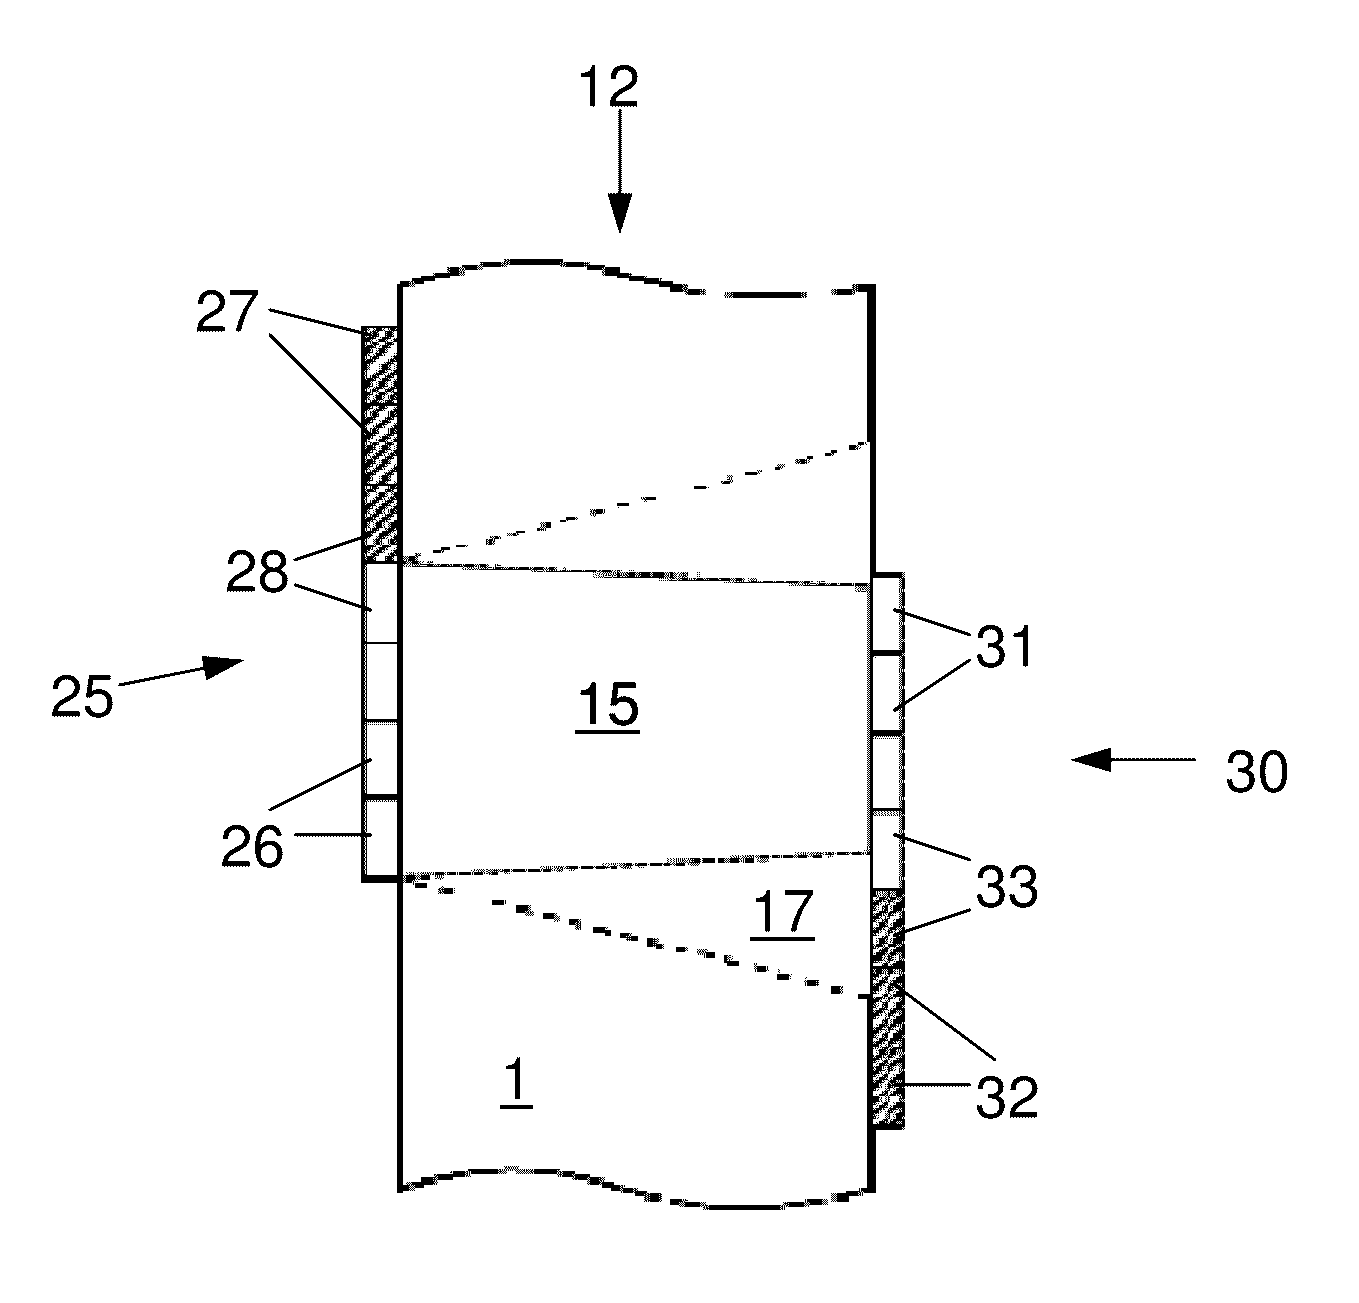 Acoustic-electric channel construction and operation using adaptive transducer arrays